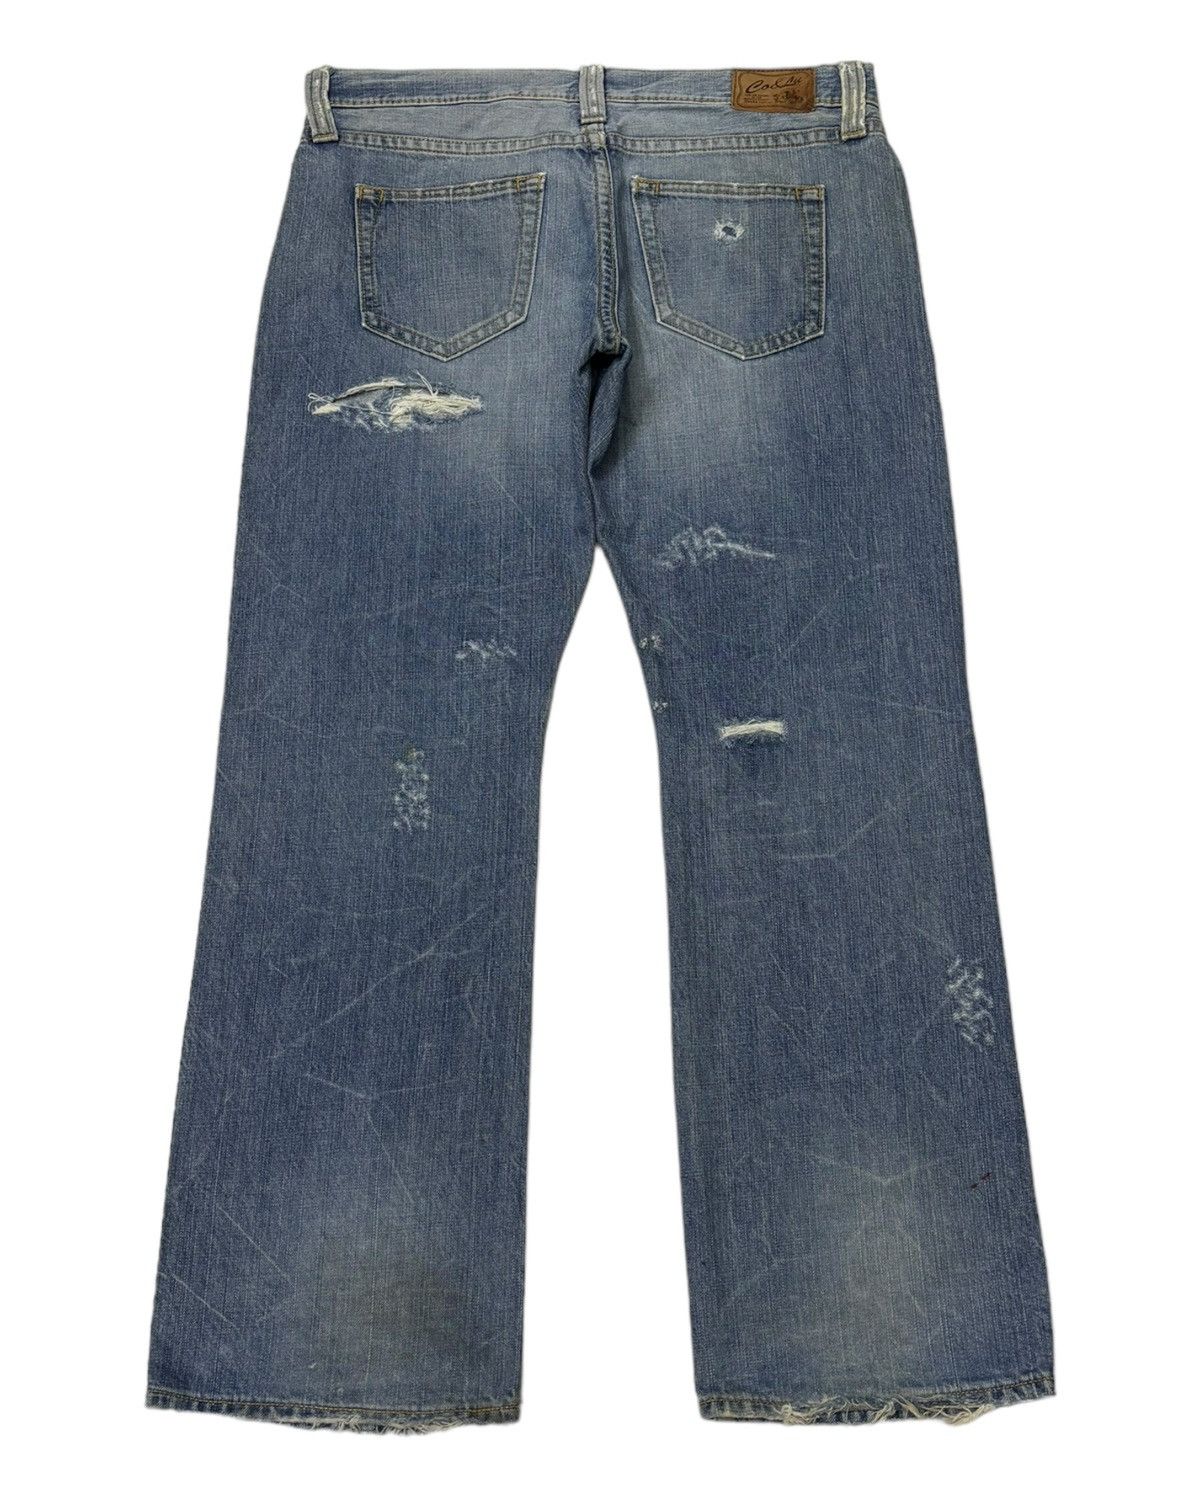 Archival Clothing - VINTAGE CO&LU THRASHED DISTRESS RIPS BAGGY FLARE JEANS - 8